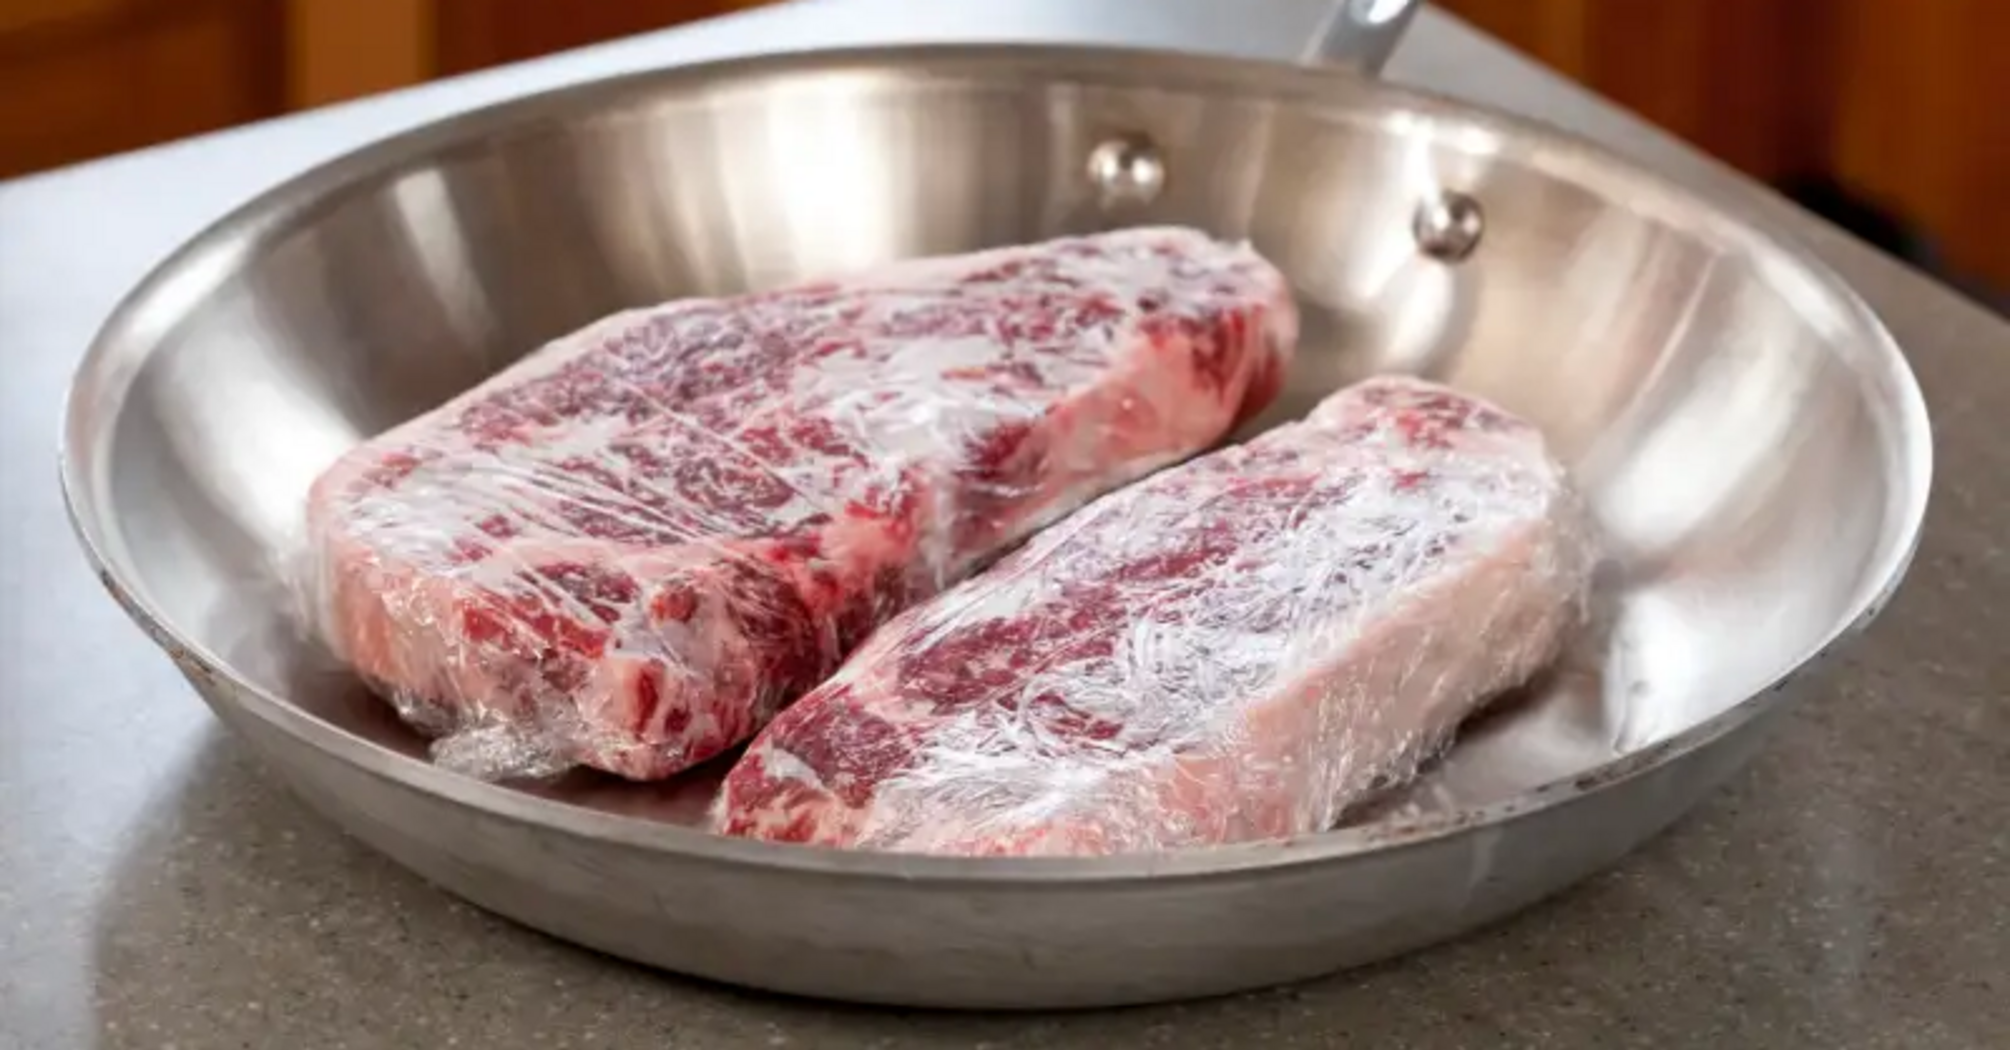 How to defrost meat